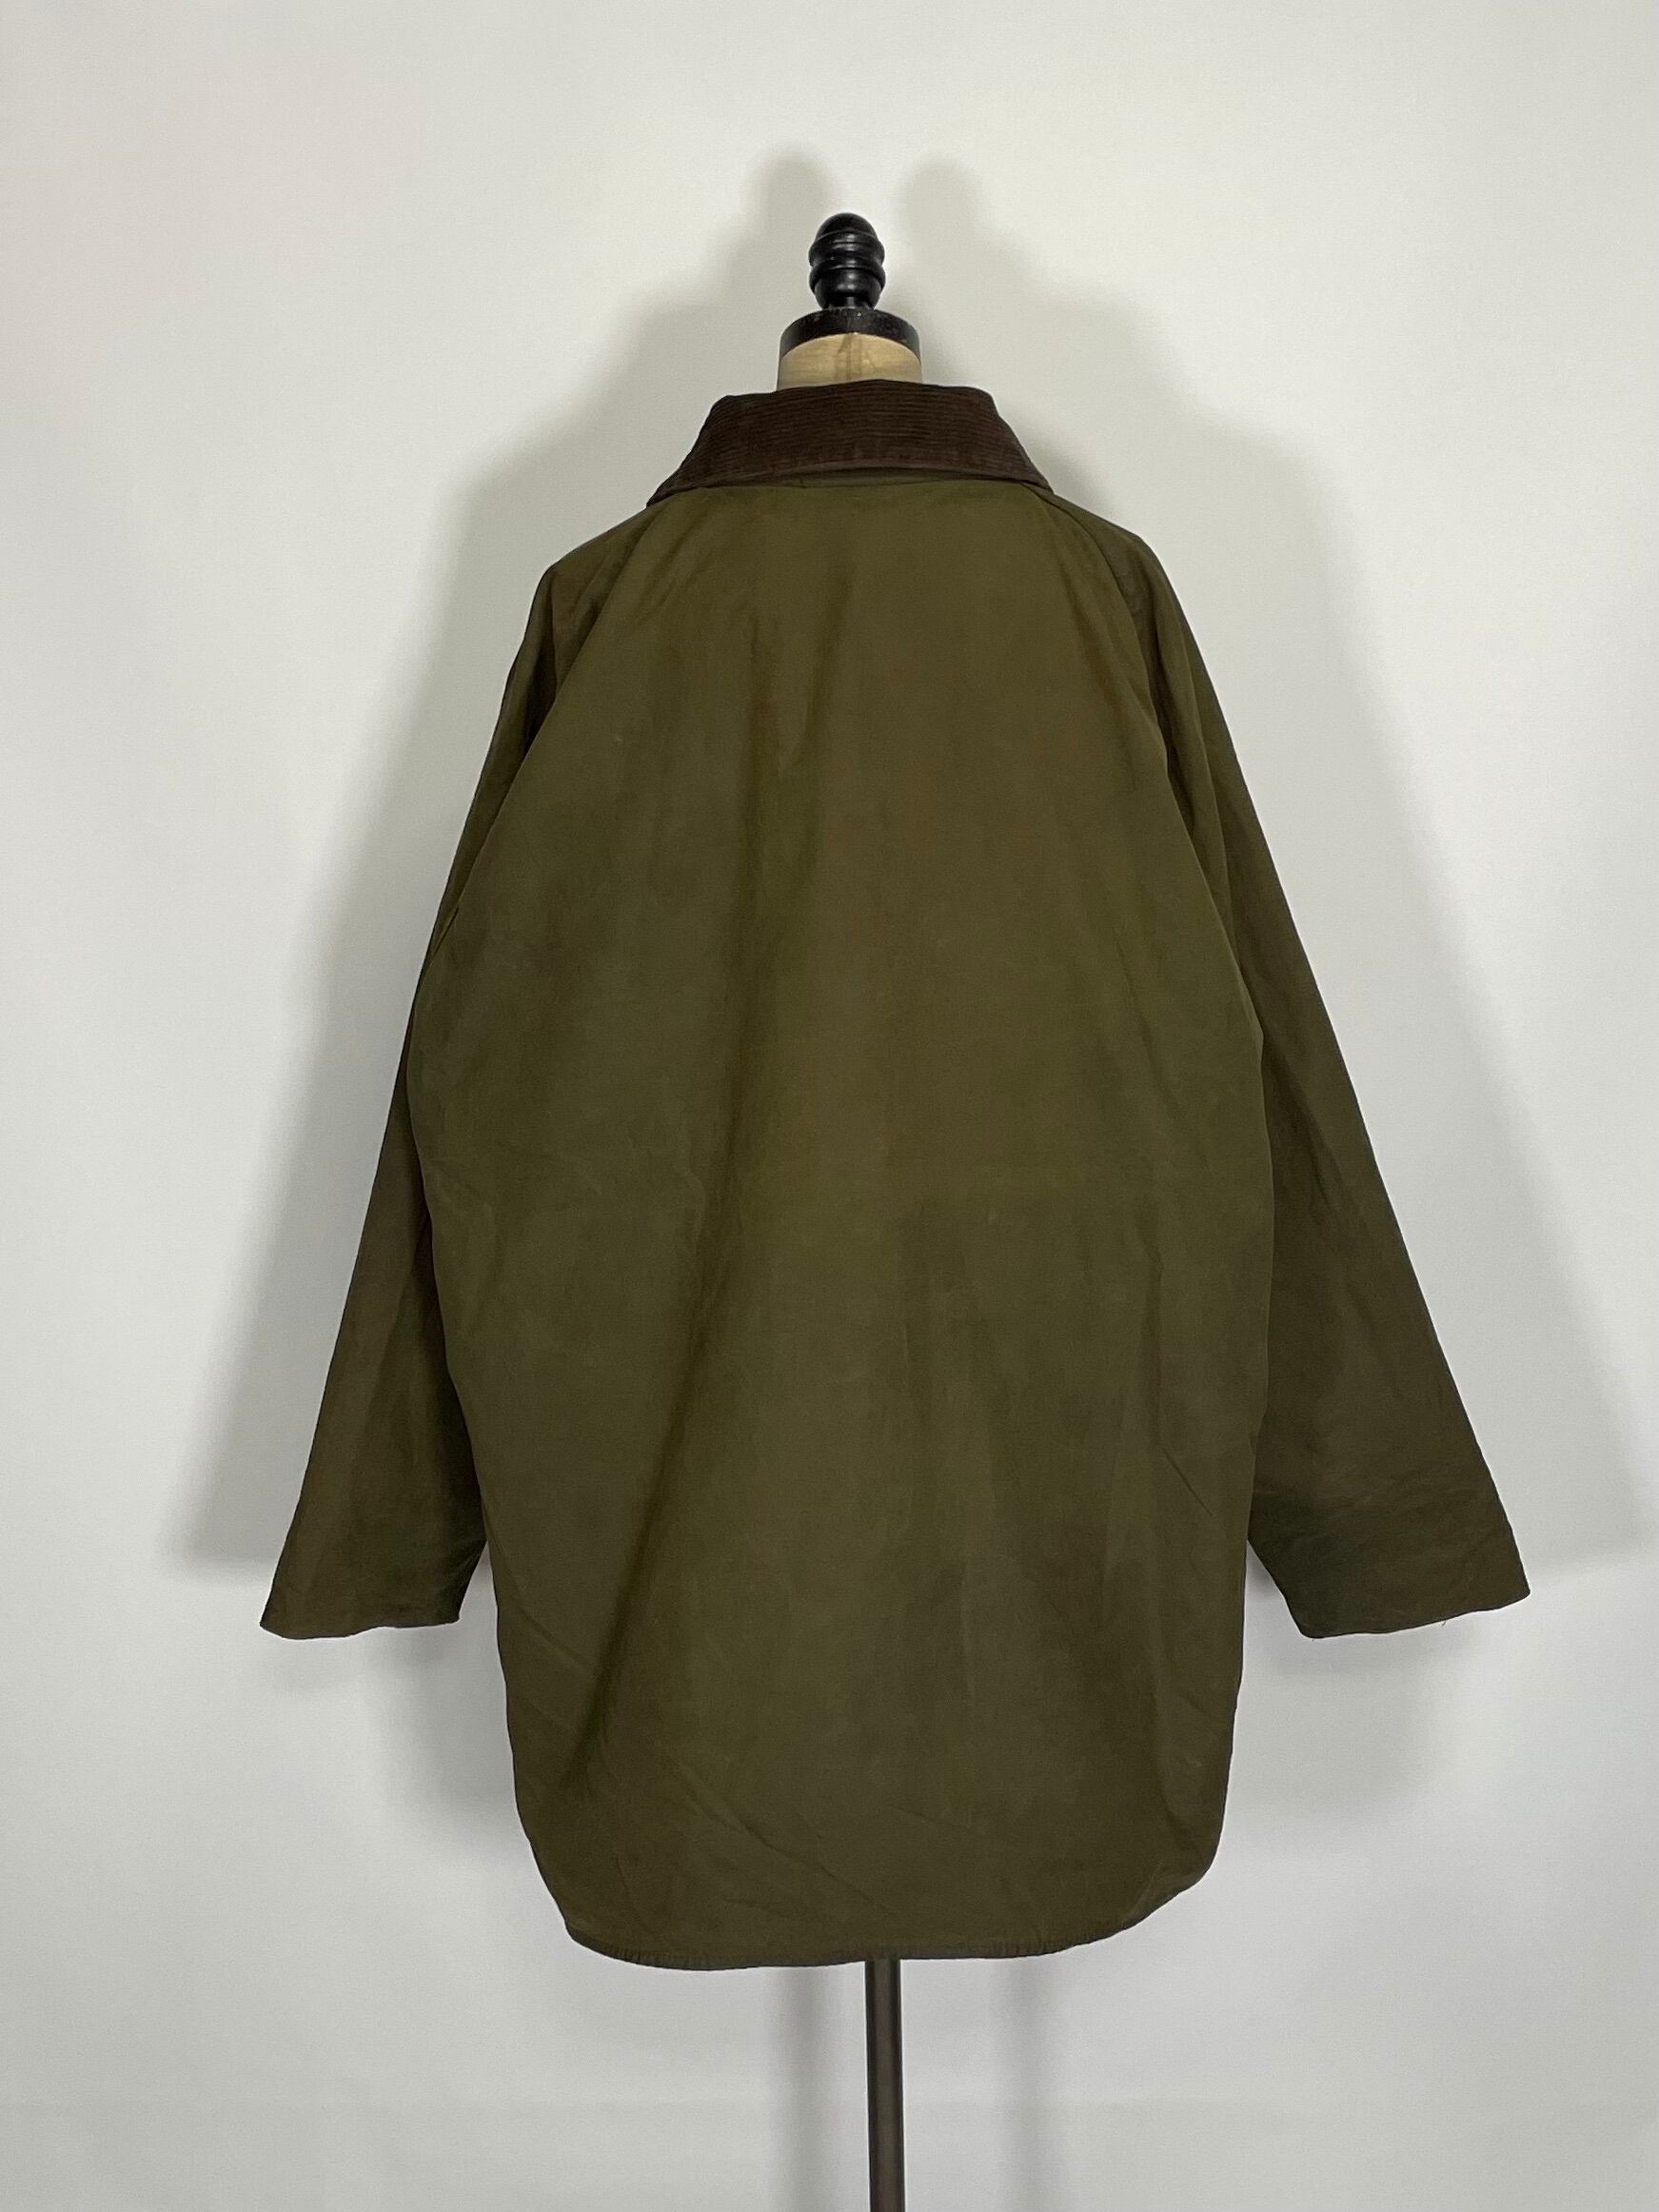 95'S A150/BARBOUR BEAUFORT 『46/SAGE』 | yoused